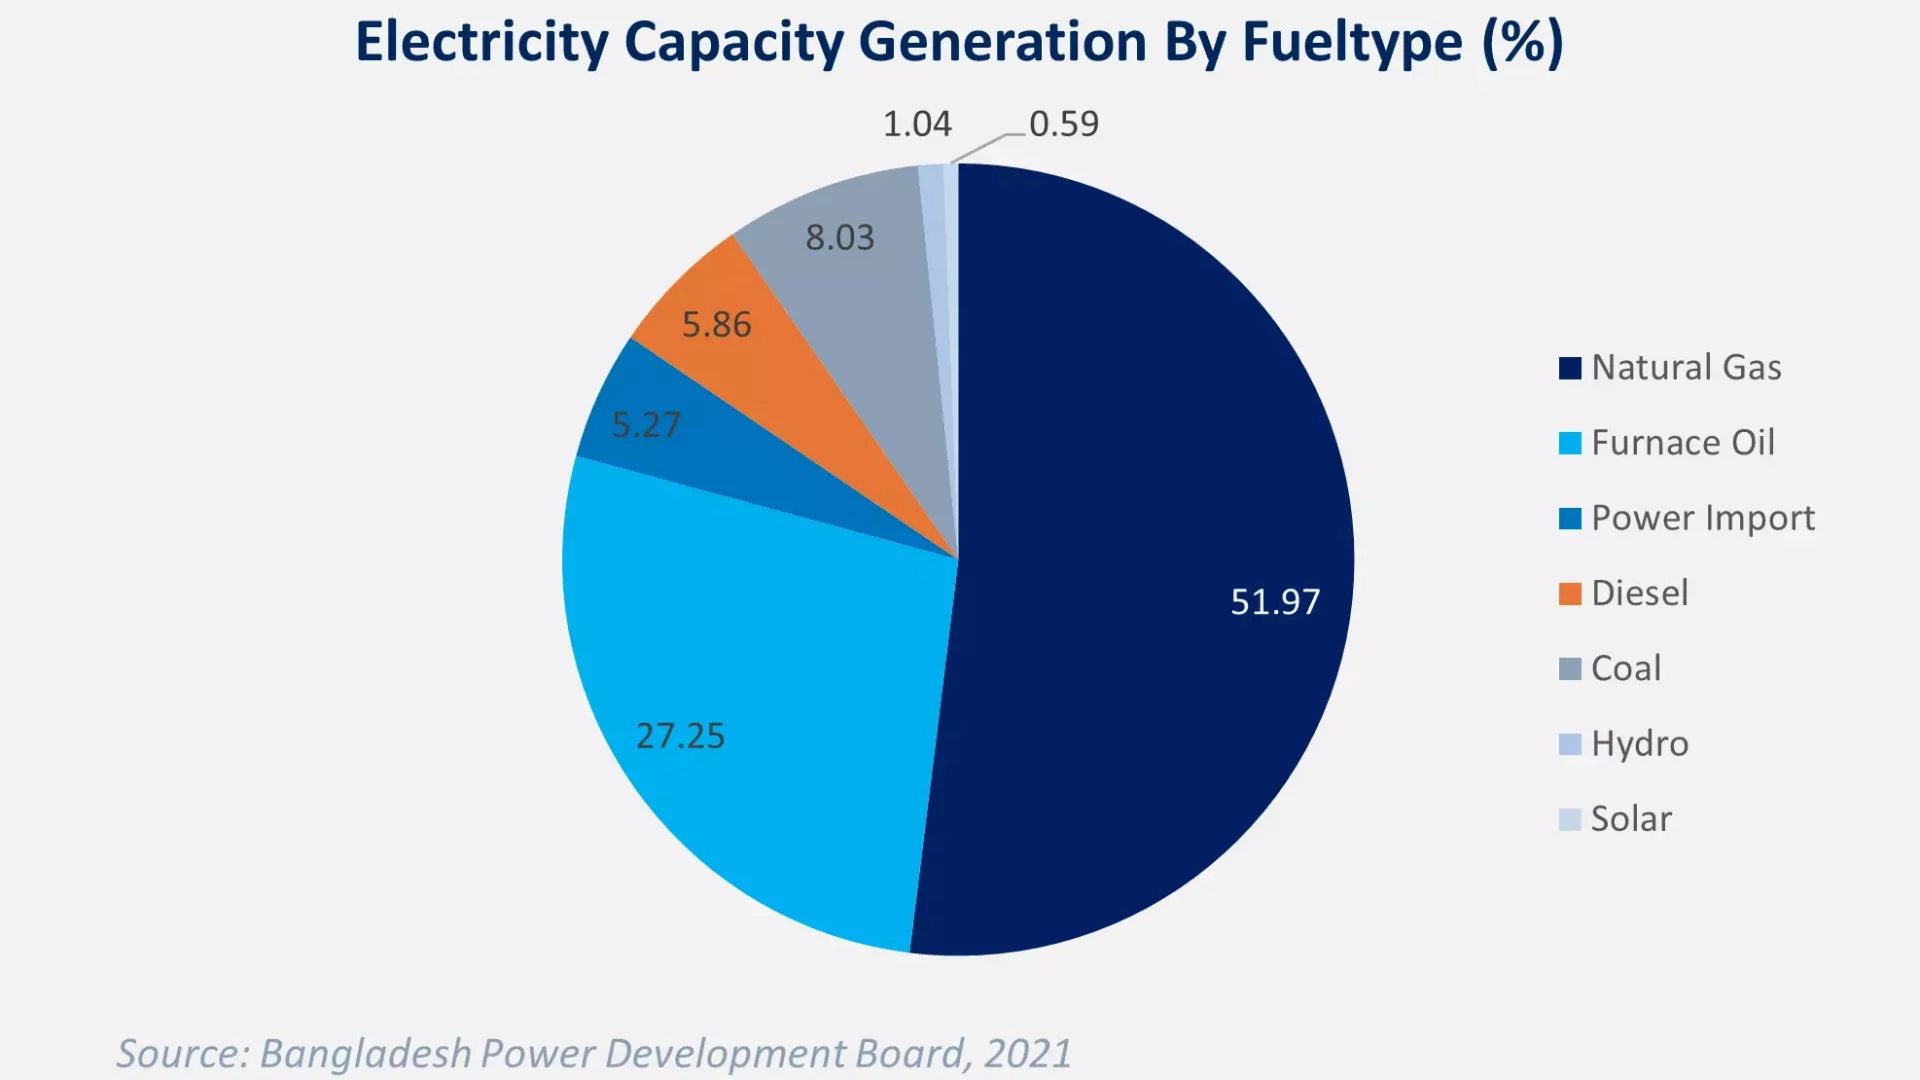 Electricity Generation Capacity by Fuel Type in Bangladesh